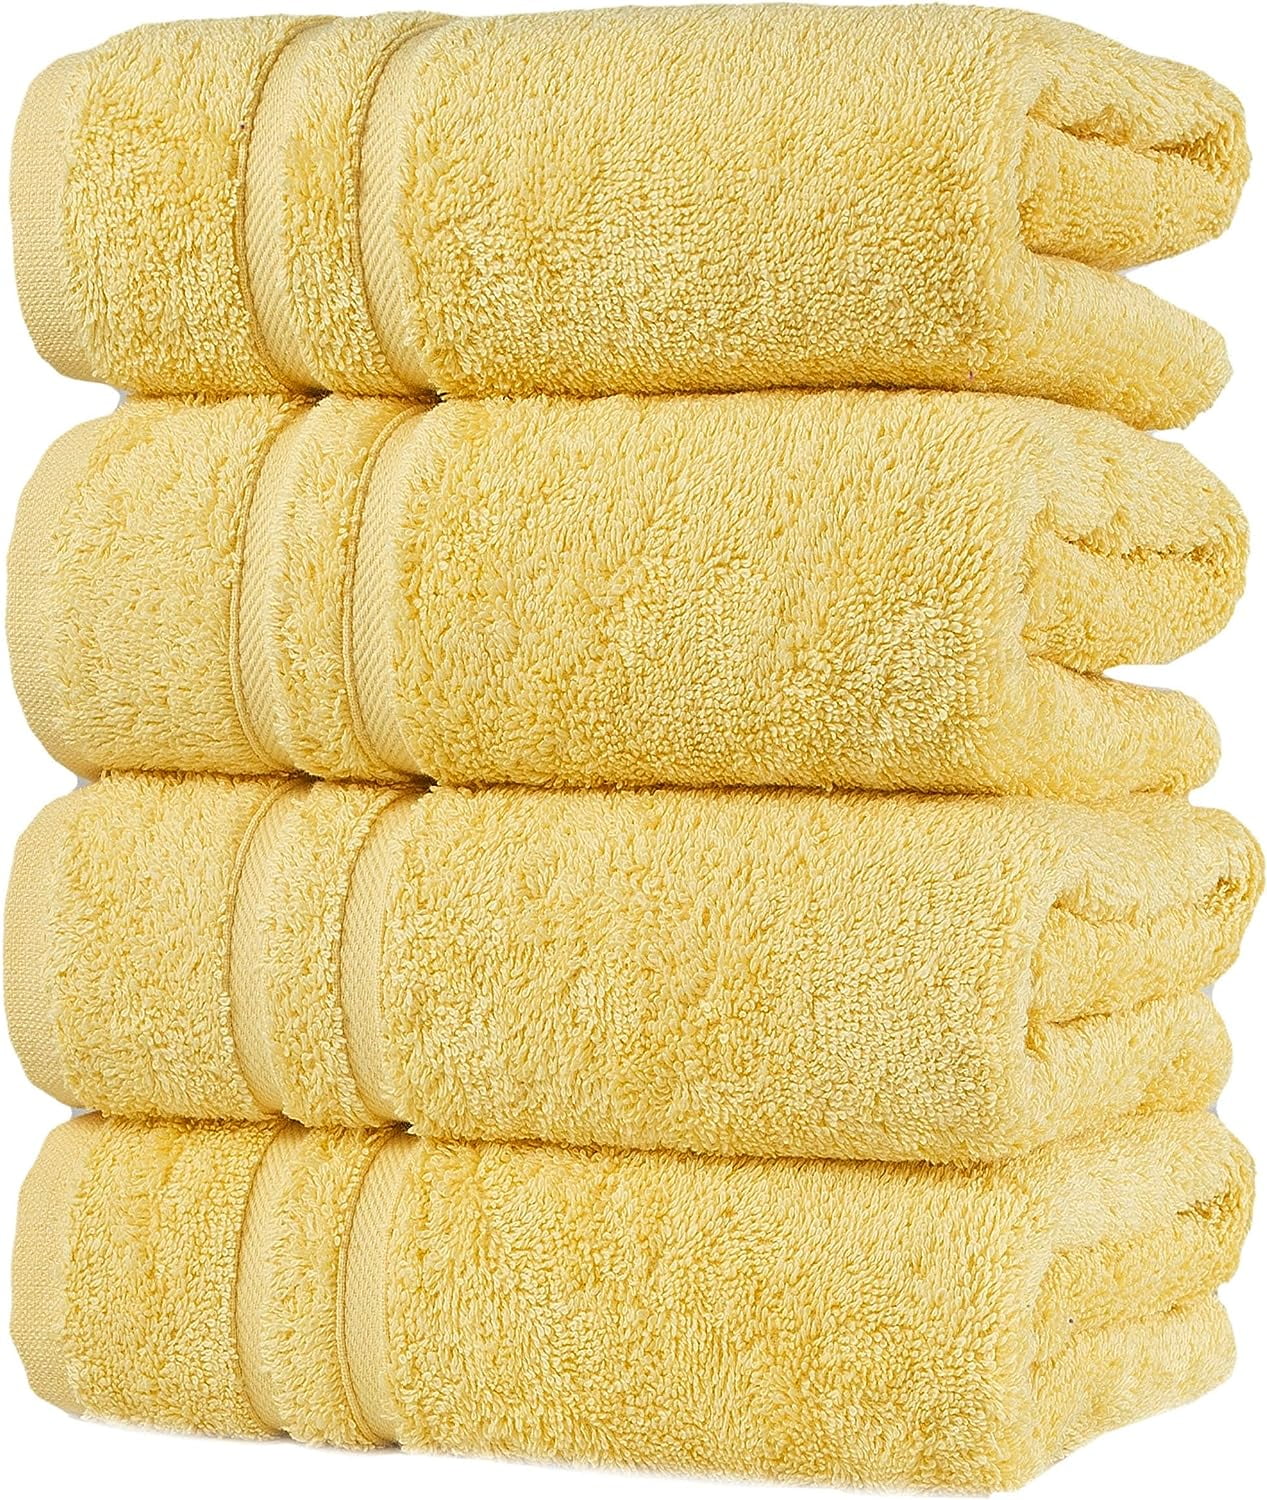 Hammam Linen Yellow Hand Towels Set of 4 – Luxury Cotton Hand Towels for  Bathroom – Soft Quick Dry Towels